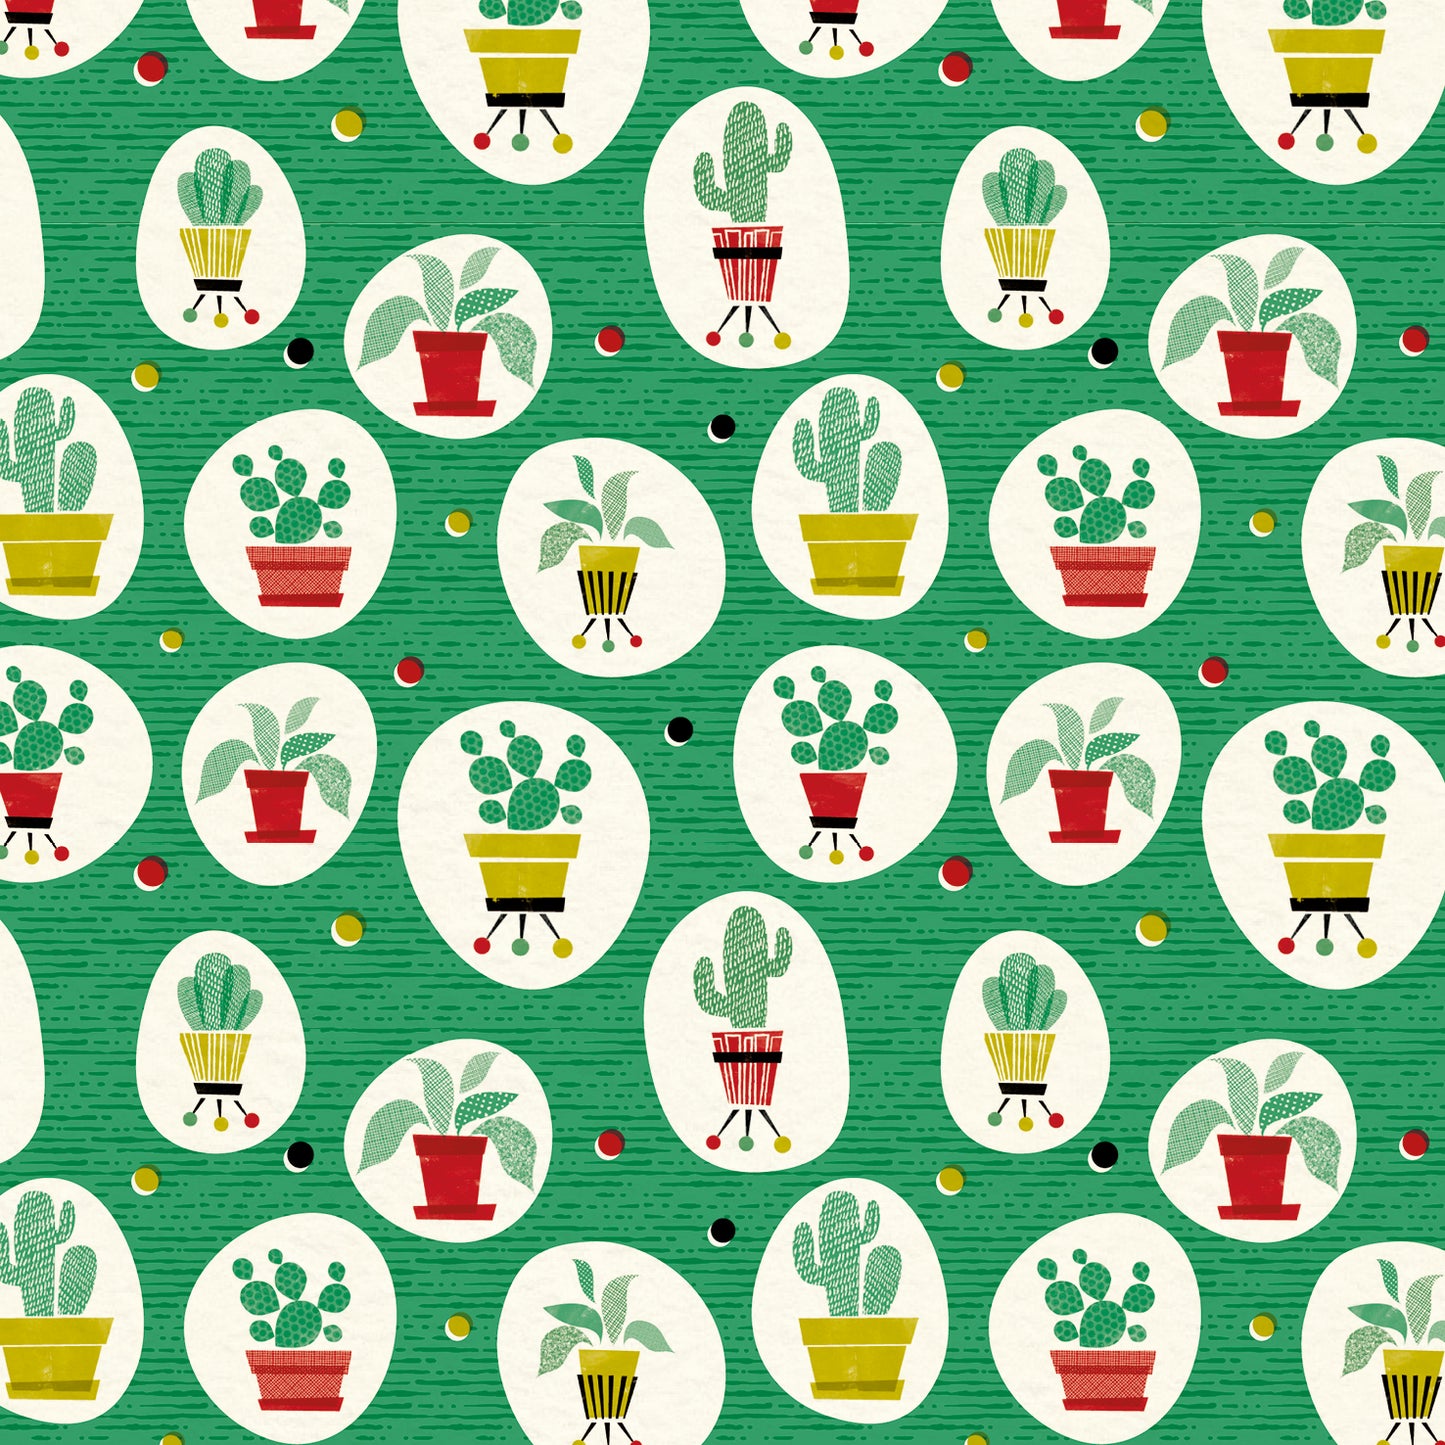 Just Patterns: Cactii, Green